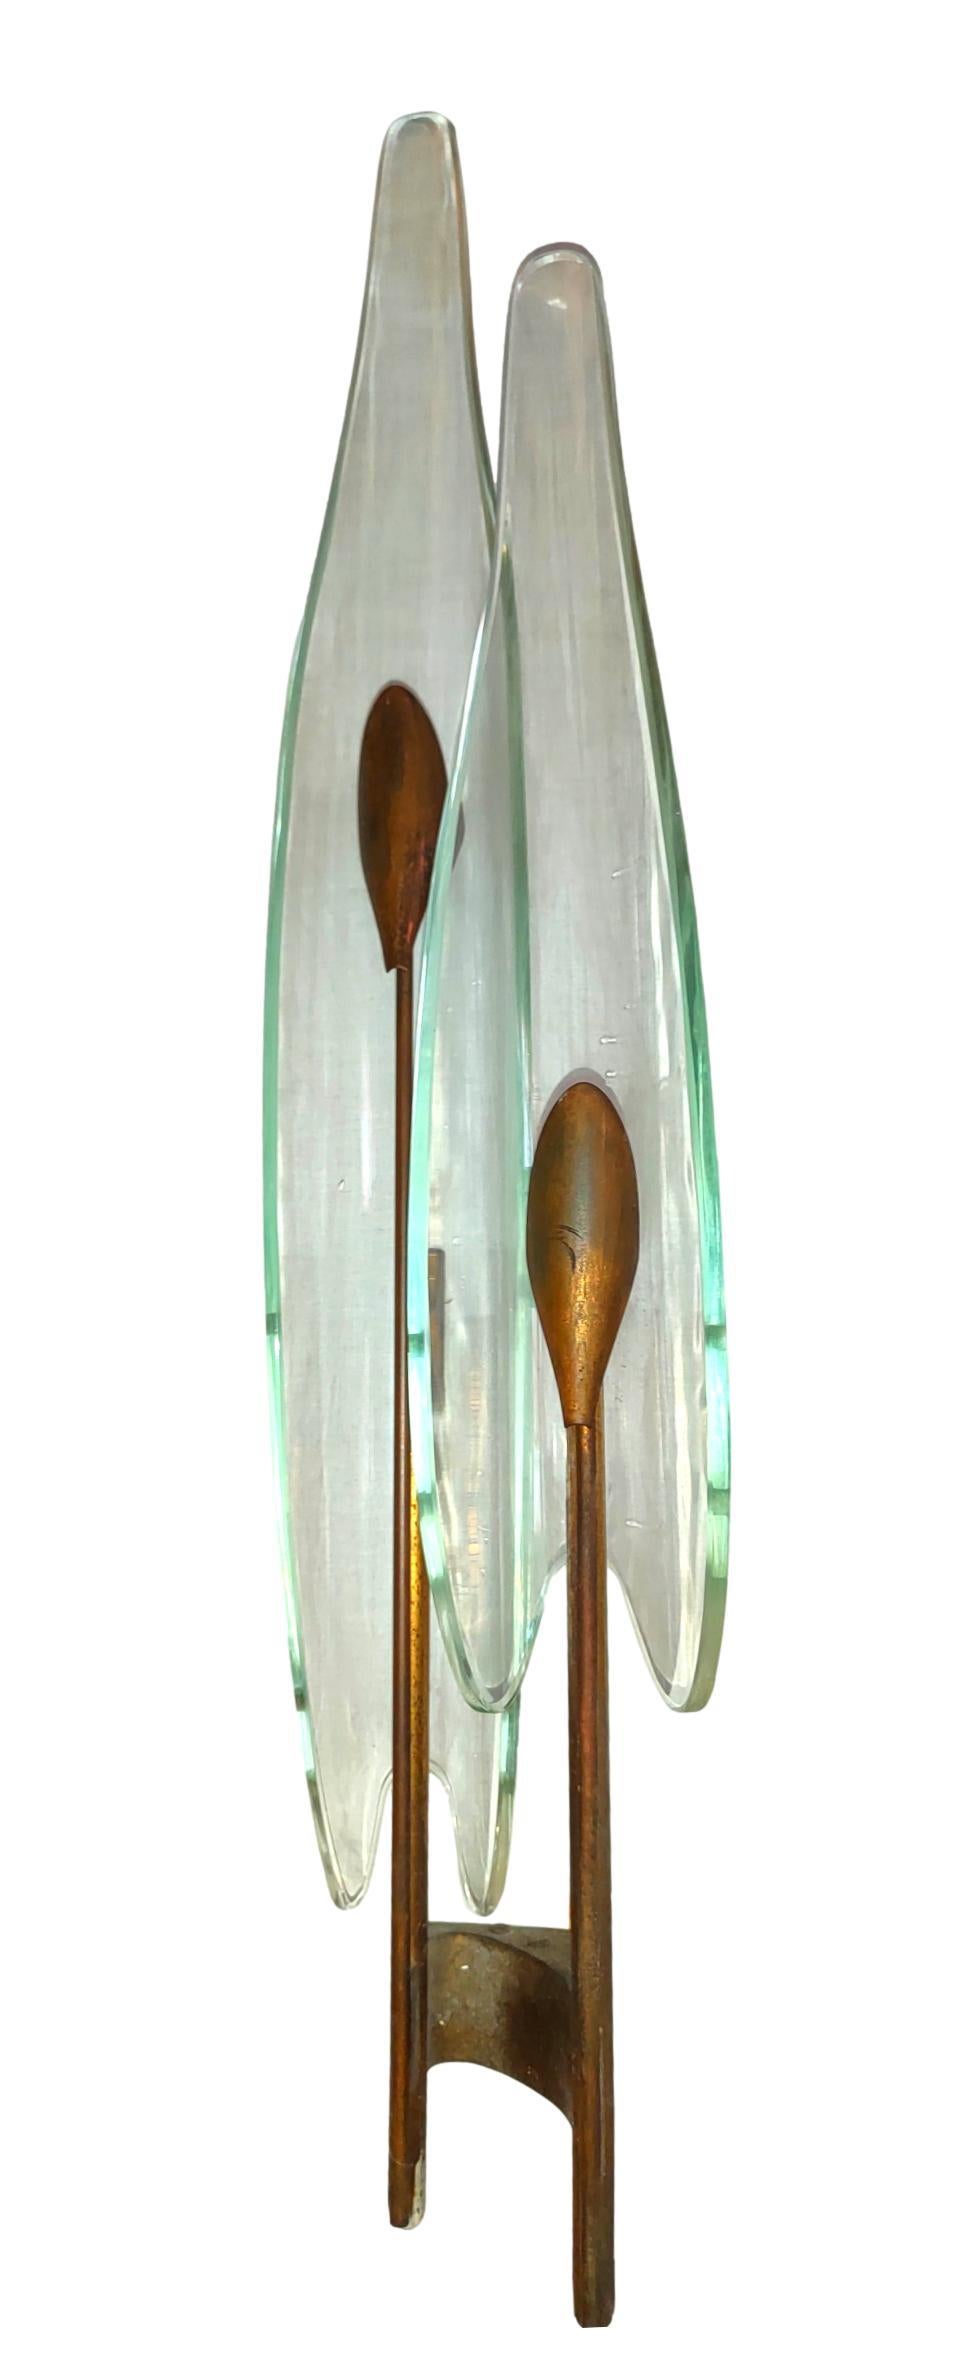 Mid-Century Modern Pair of Dahlia Wall Lamps 1461 Model Design Max Ingrand for Fontana Arte 1950 For Sale